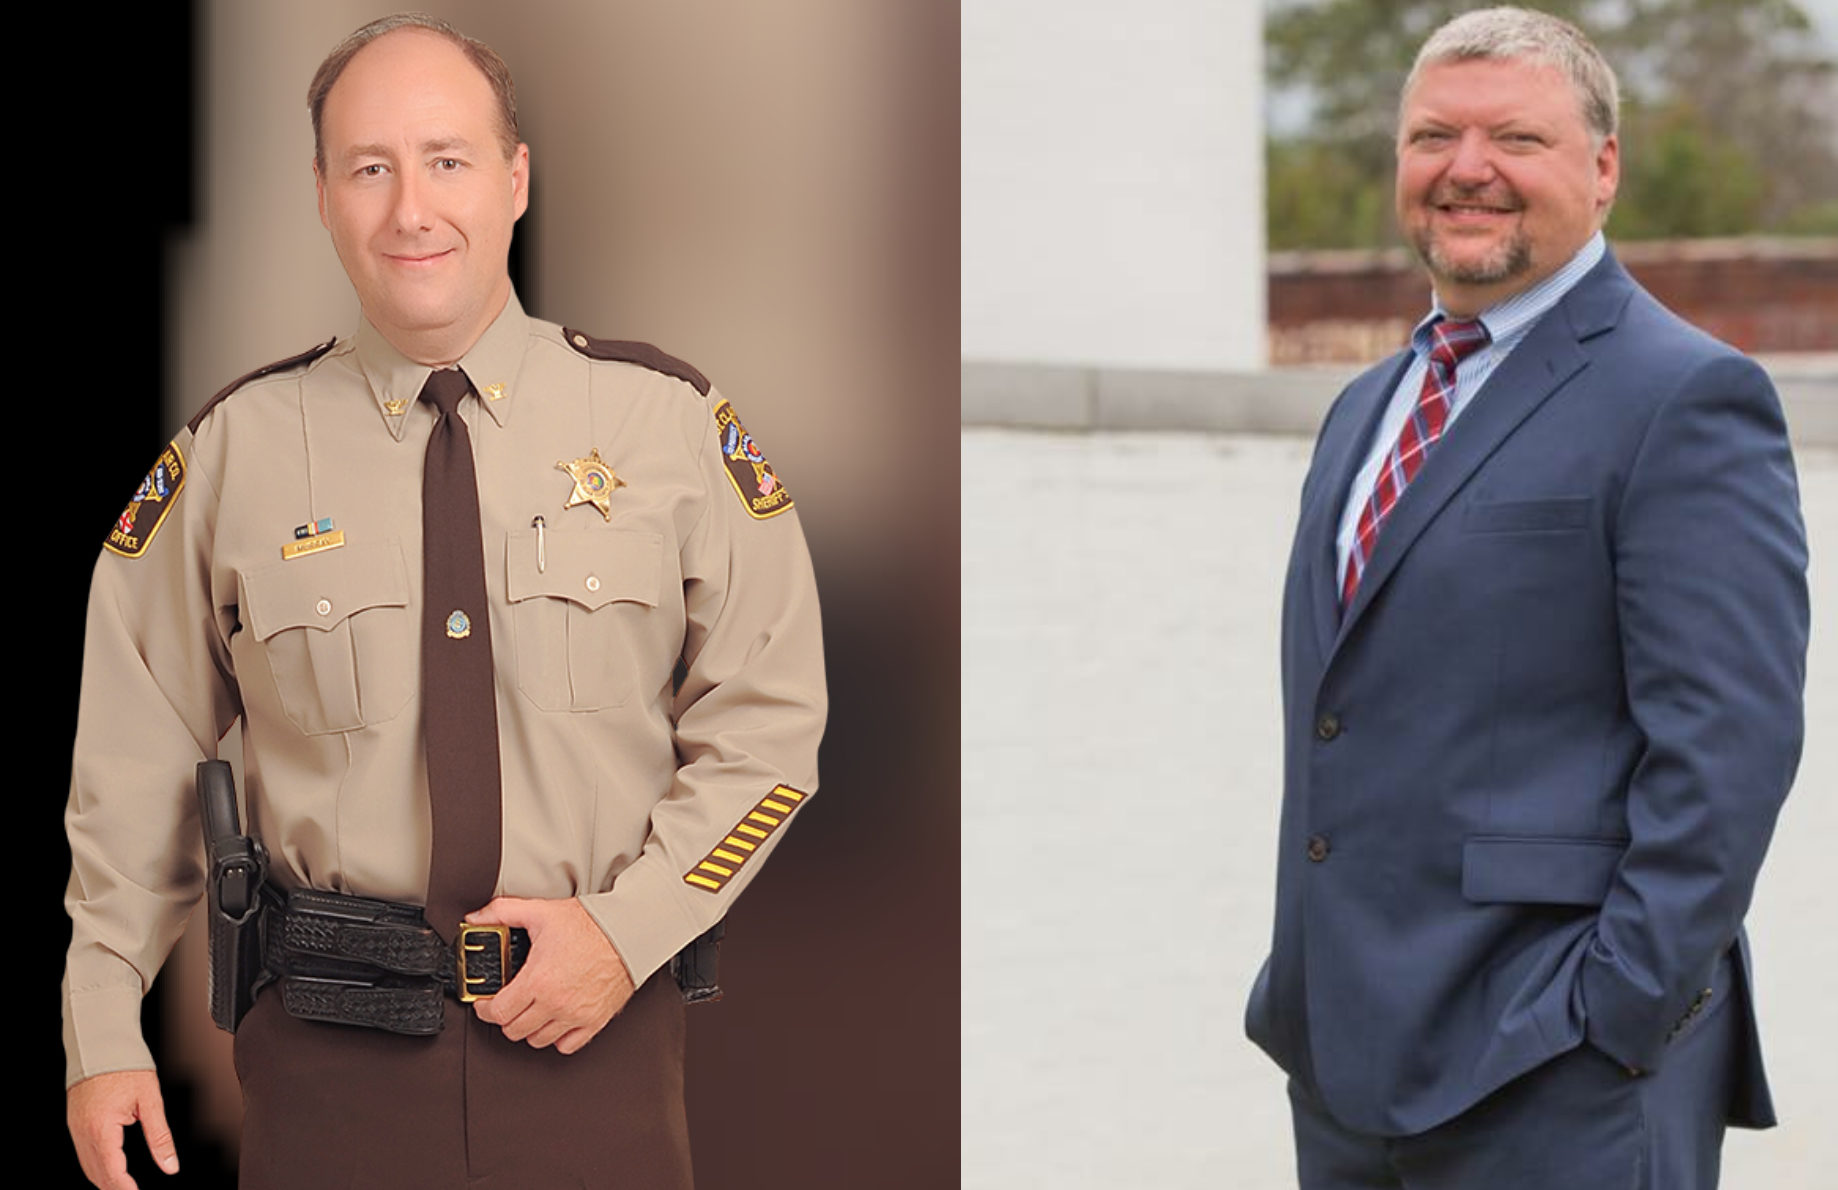 Mike Howard wins St. Clair Superintendent primary, Billy Murray elected county sheriff